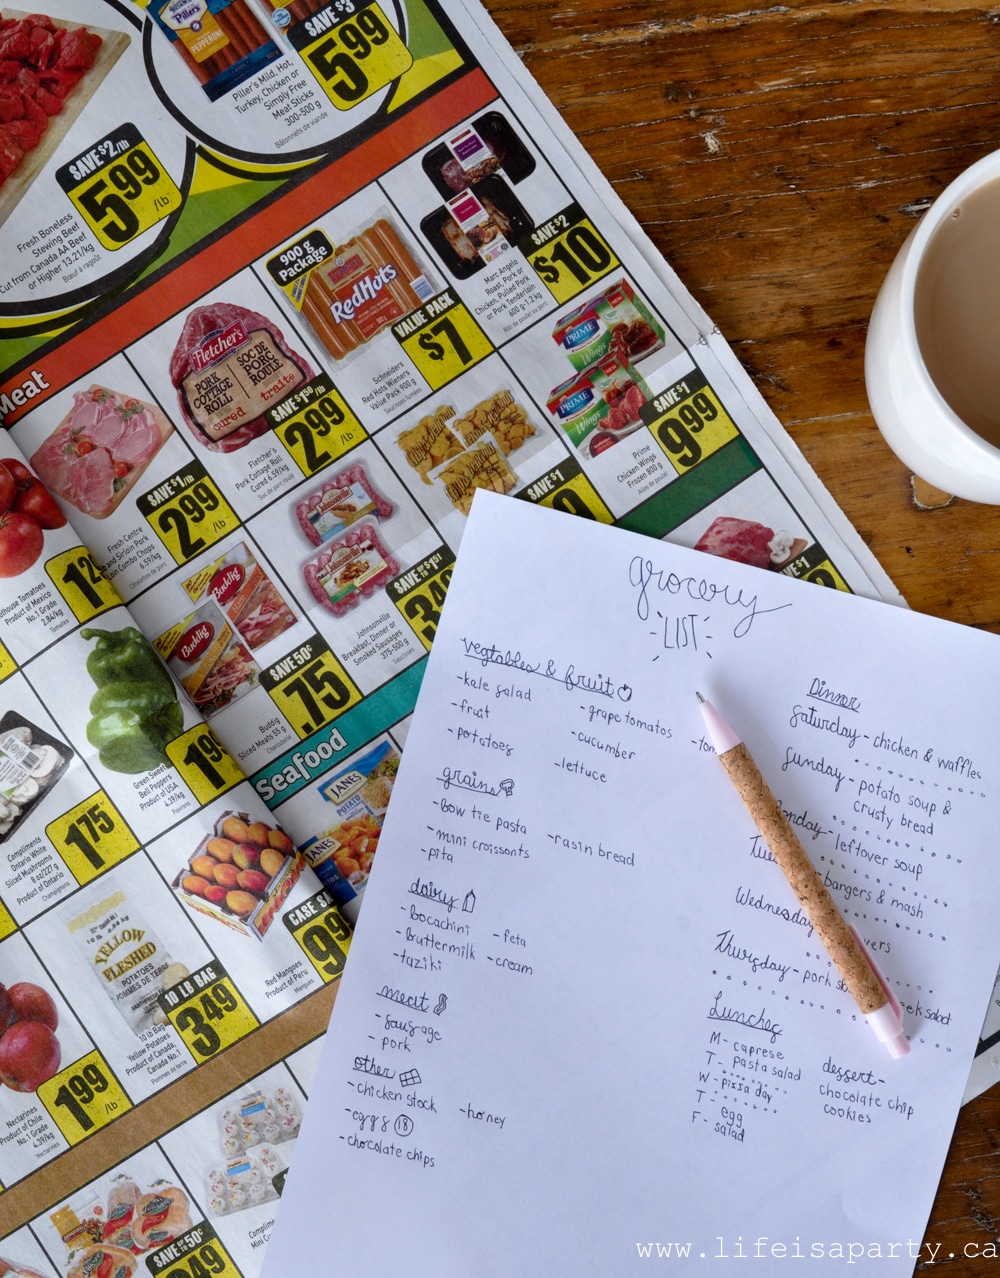 How To Meal Plan -my tried and true method to plan a weekly menu, save money, and reiginite your passion for cooking again!